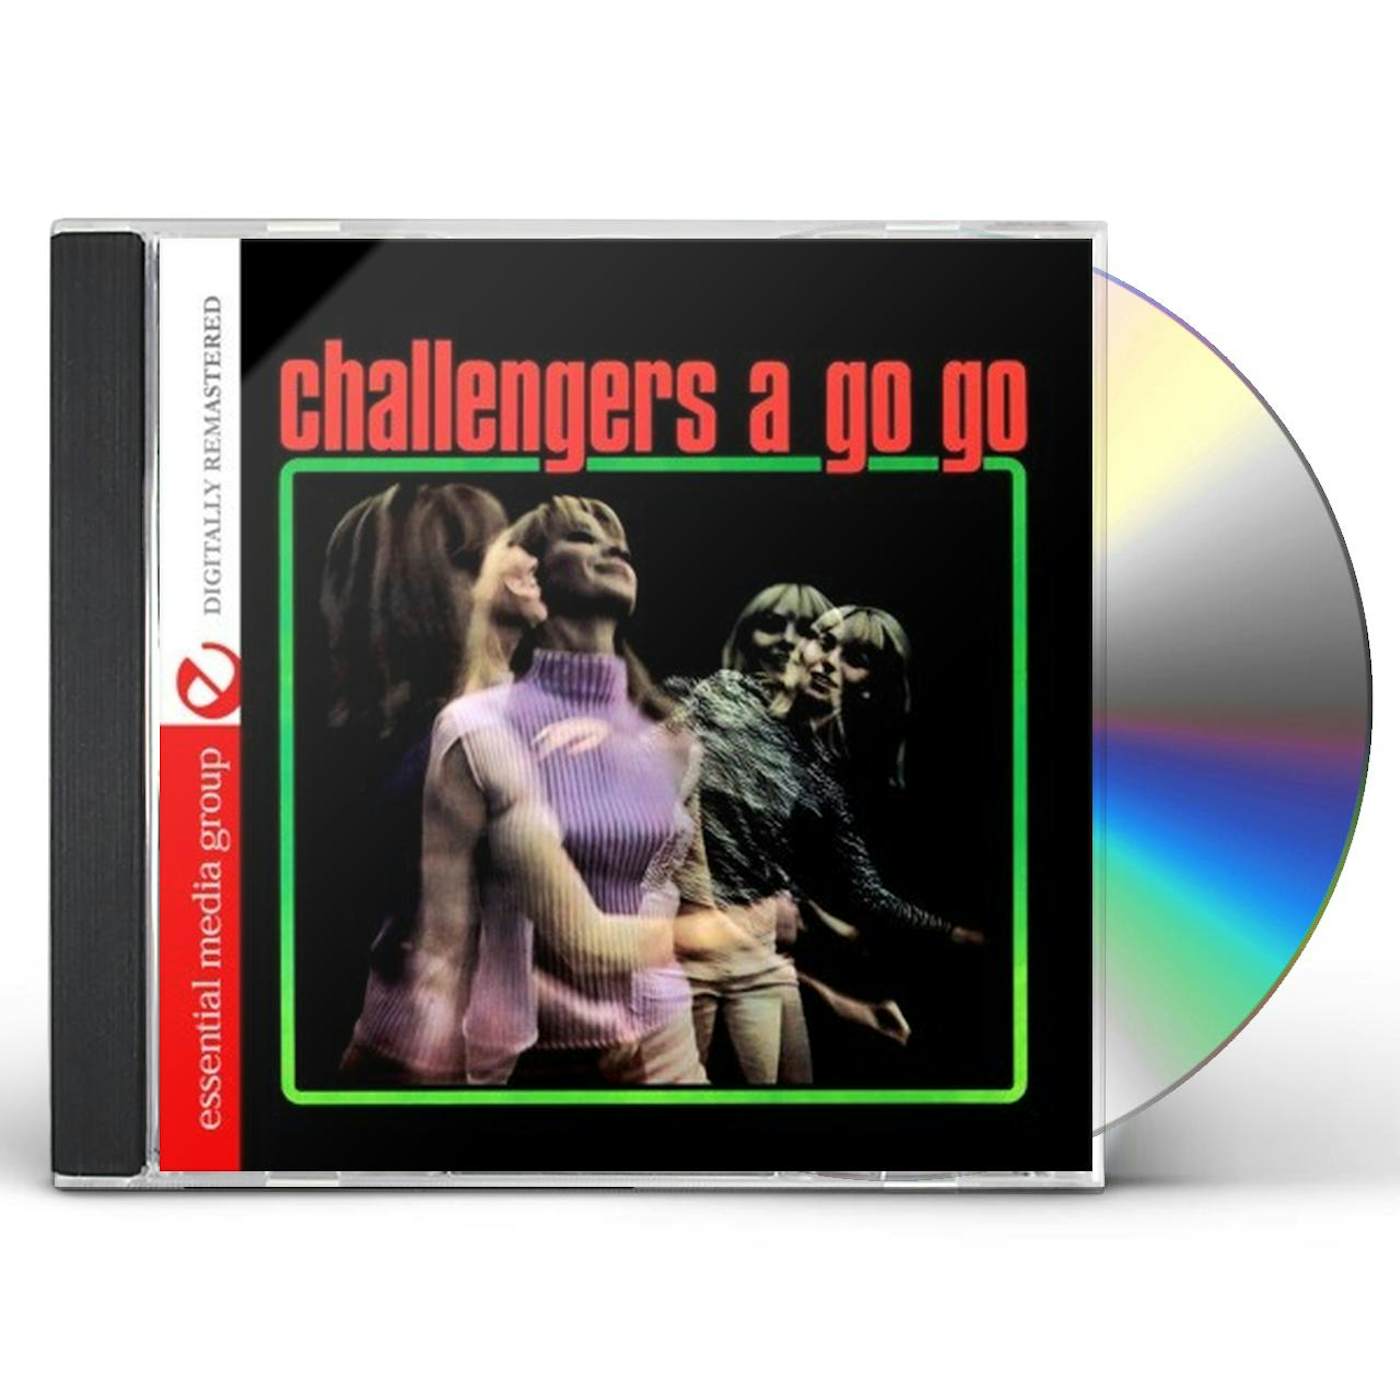 The Challengers A GO GO CD